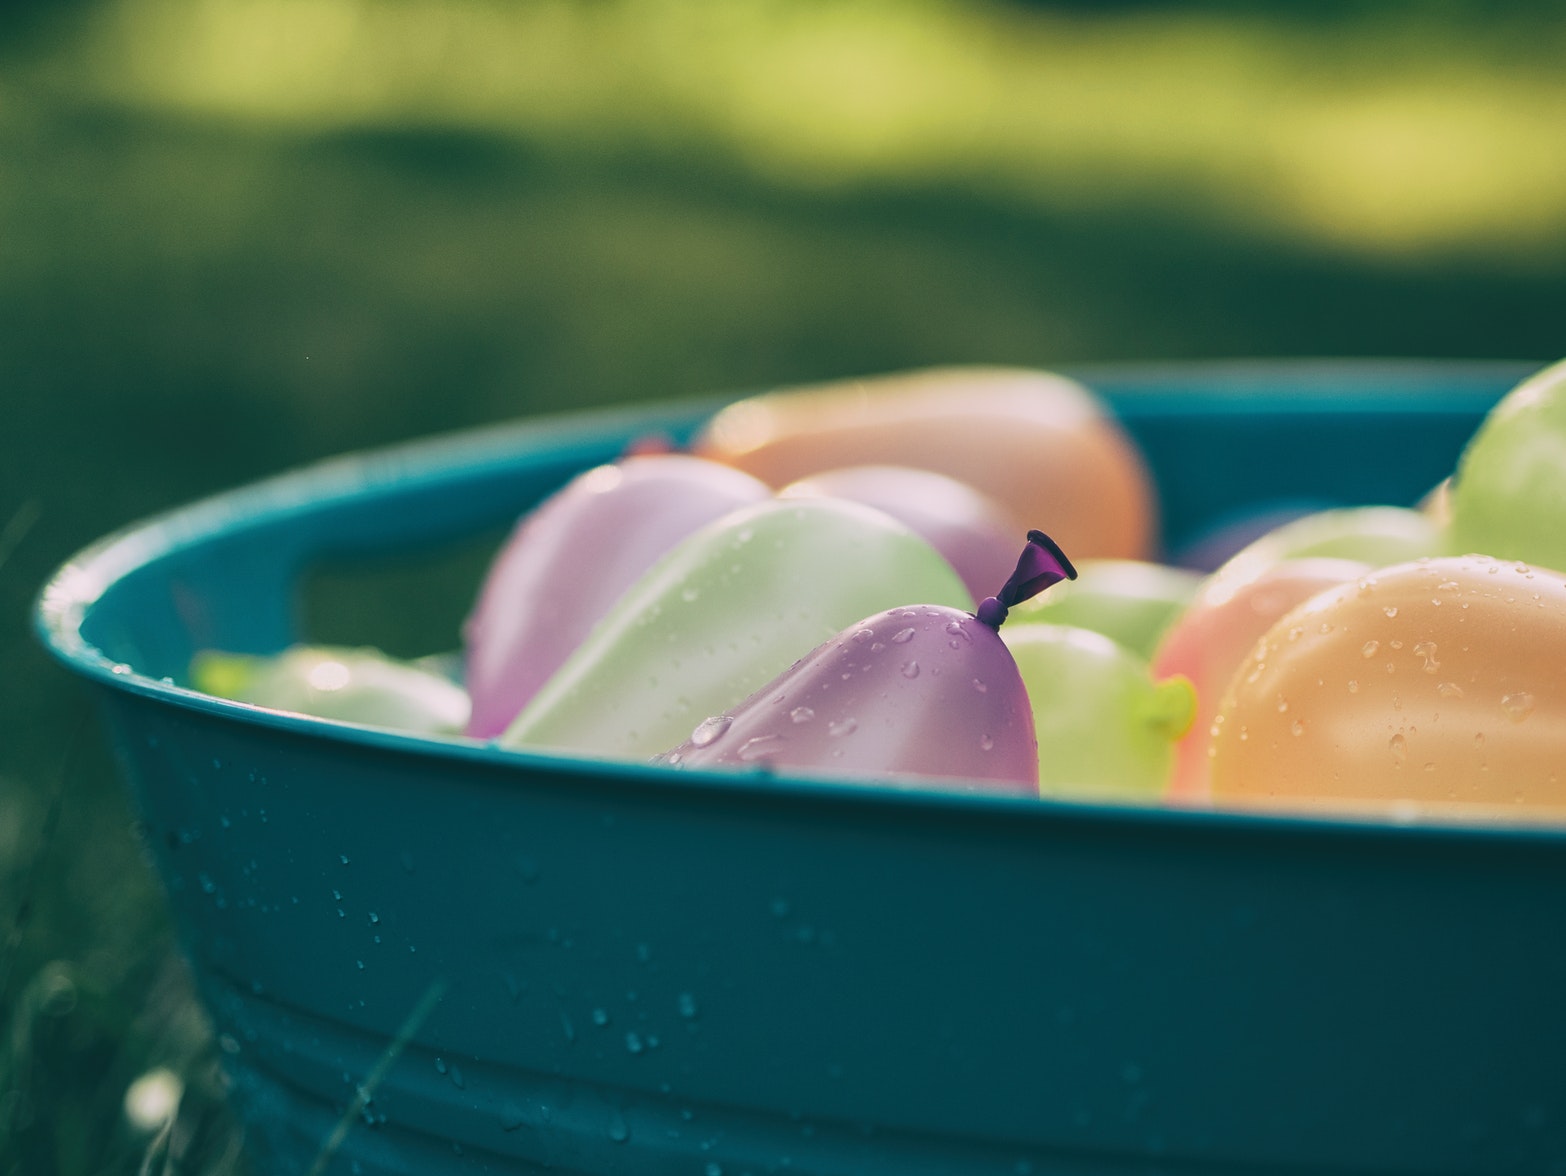 Avoid using Water Balloons or Bags